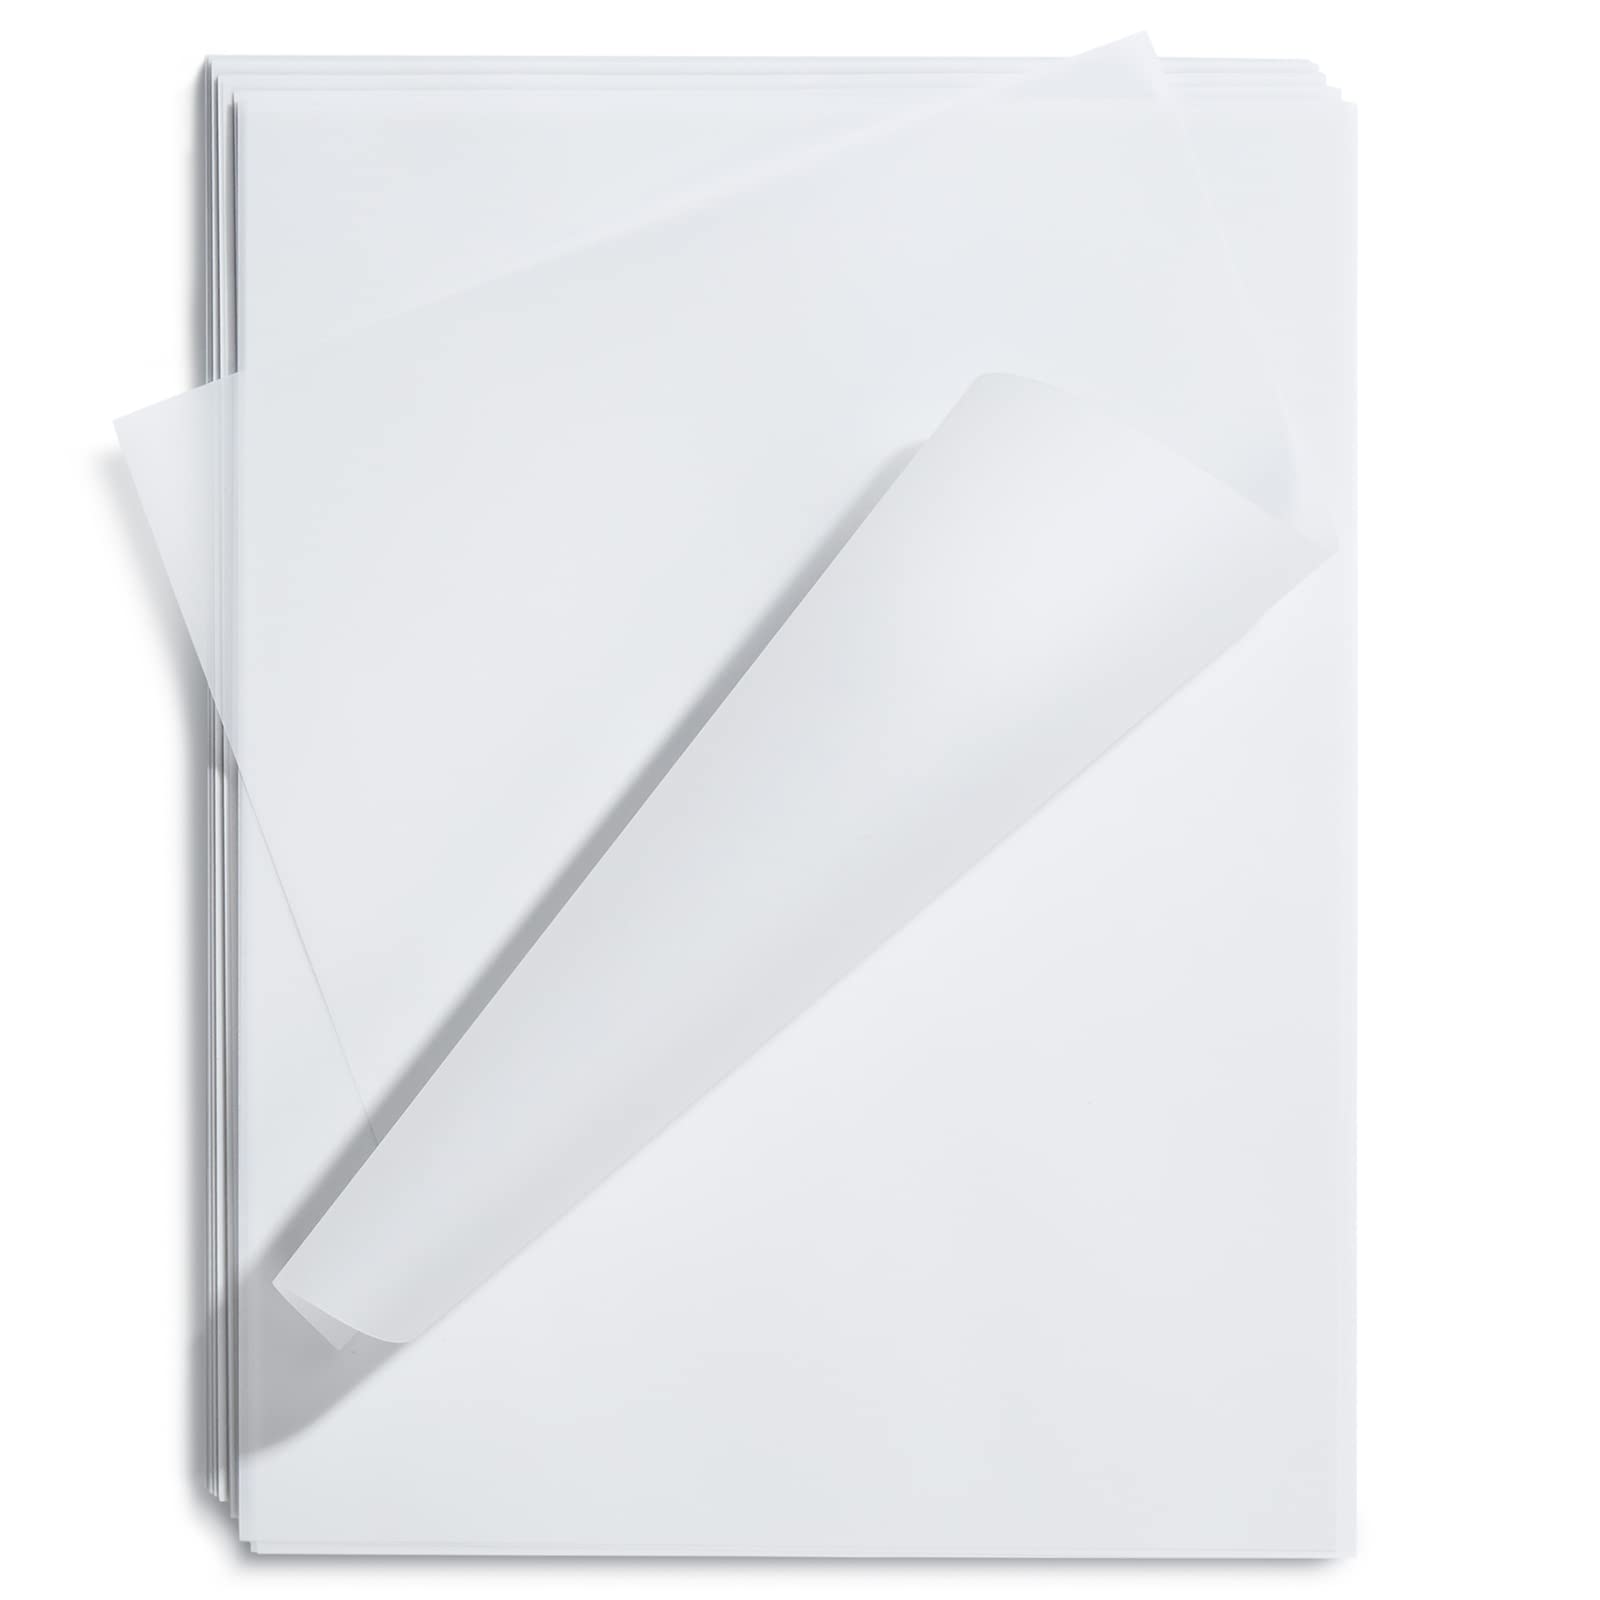  JAM PAPER Translucent Vellum 36lb Cardstock - 8.5 x 11  Coverstock - 97 gsm - Clear - 50 Sheets/Pack : Cardstock Papers : Office  Products